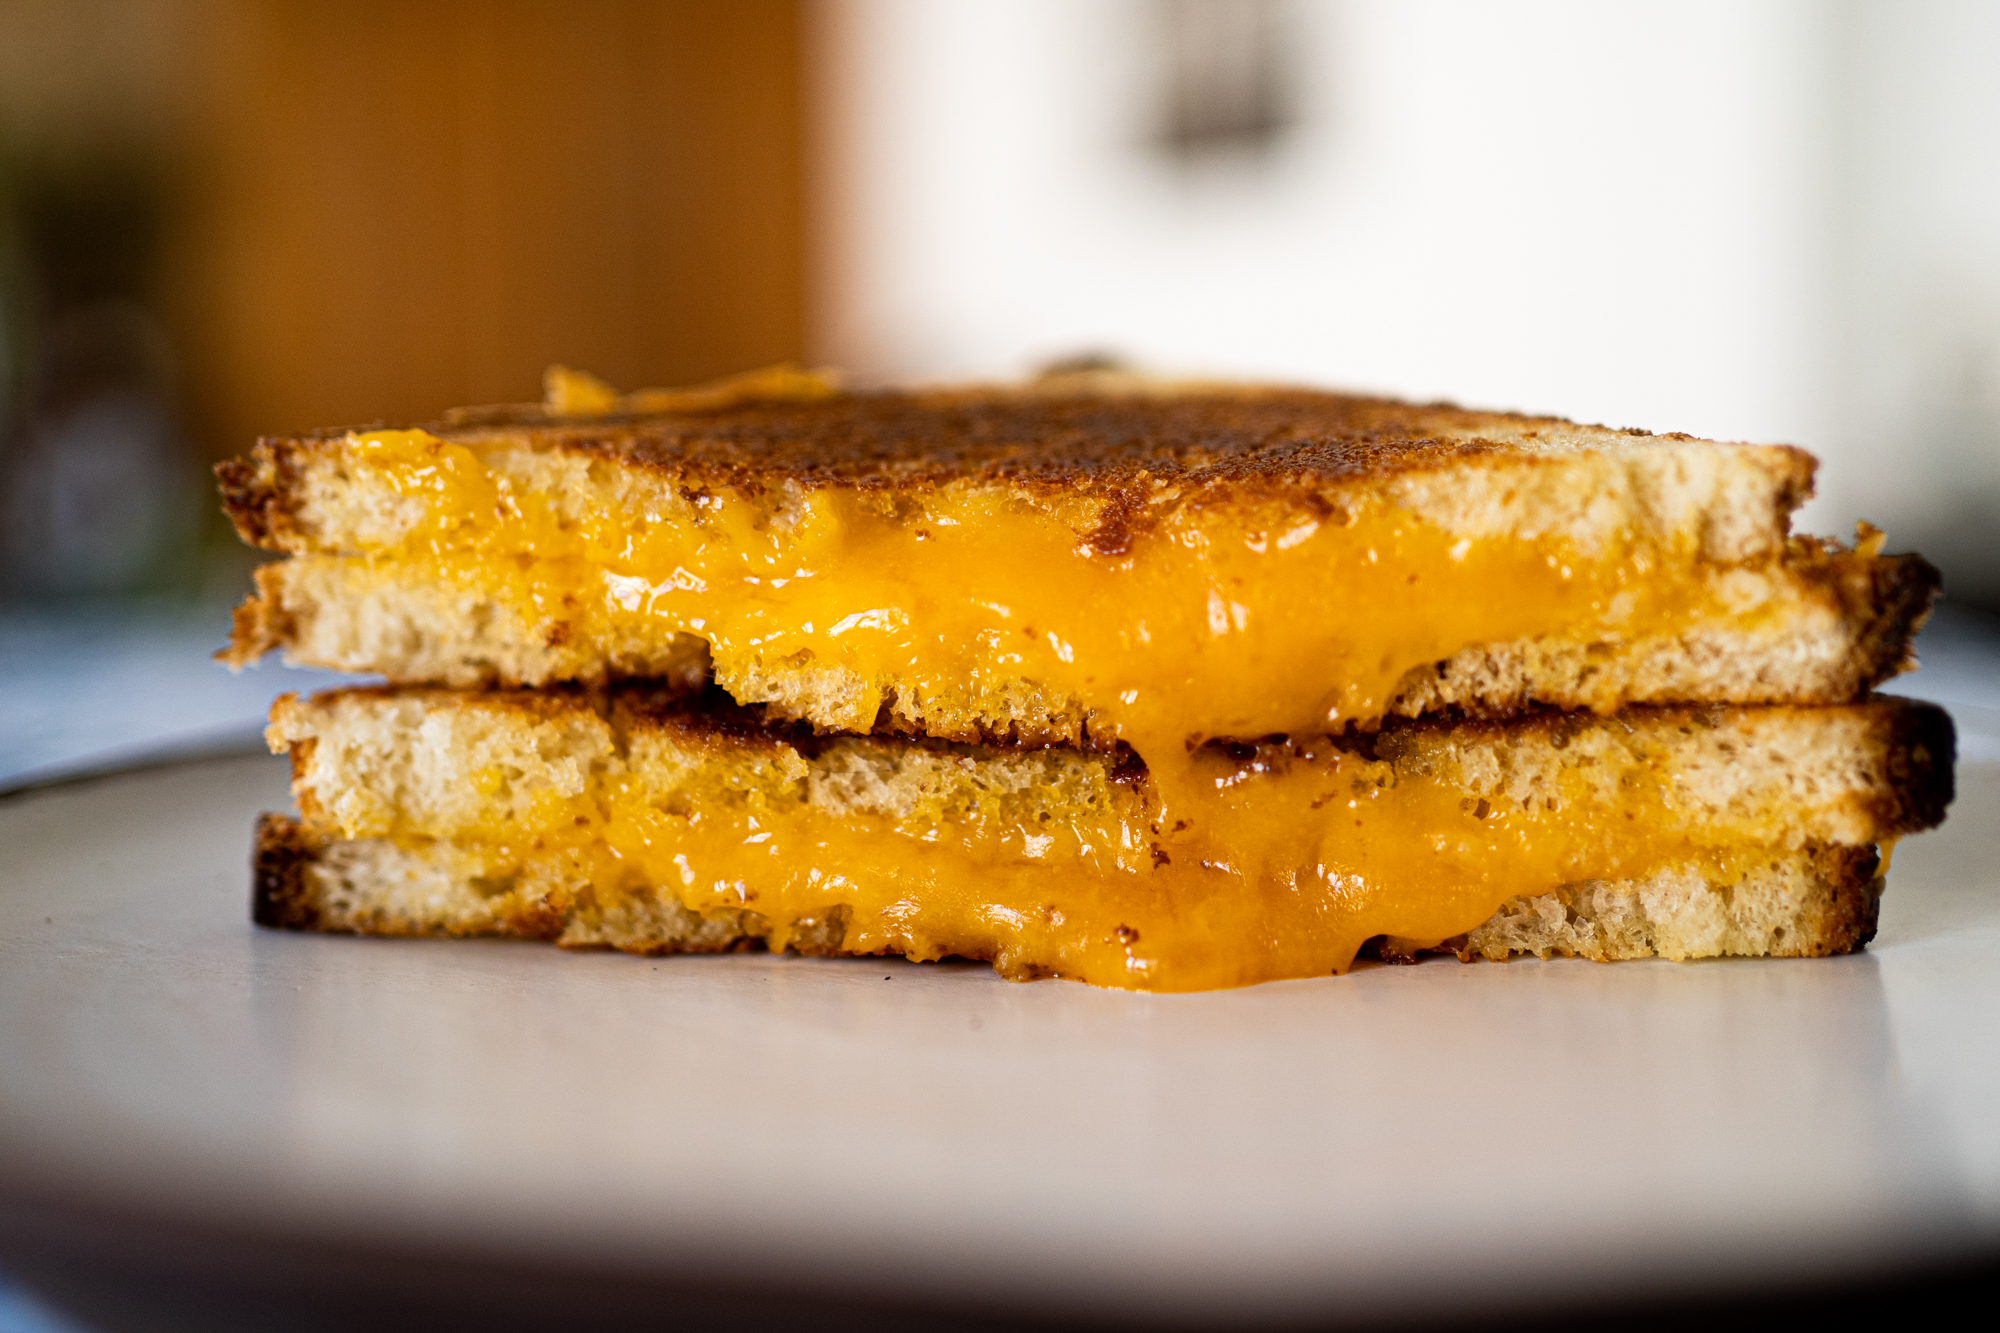 [Sandwich] Grilled cheese